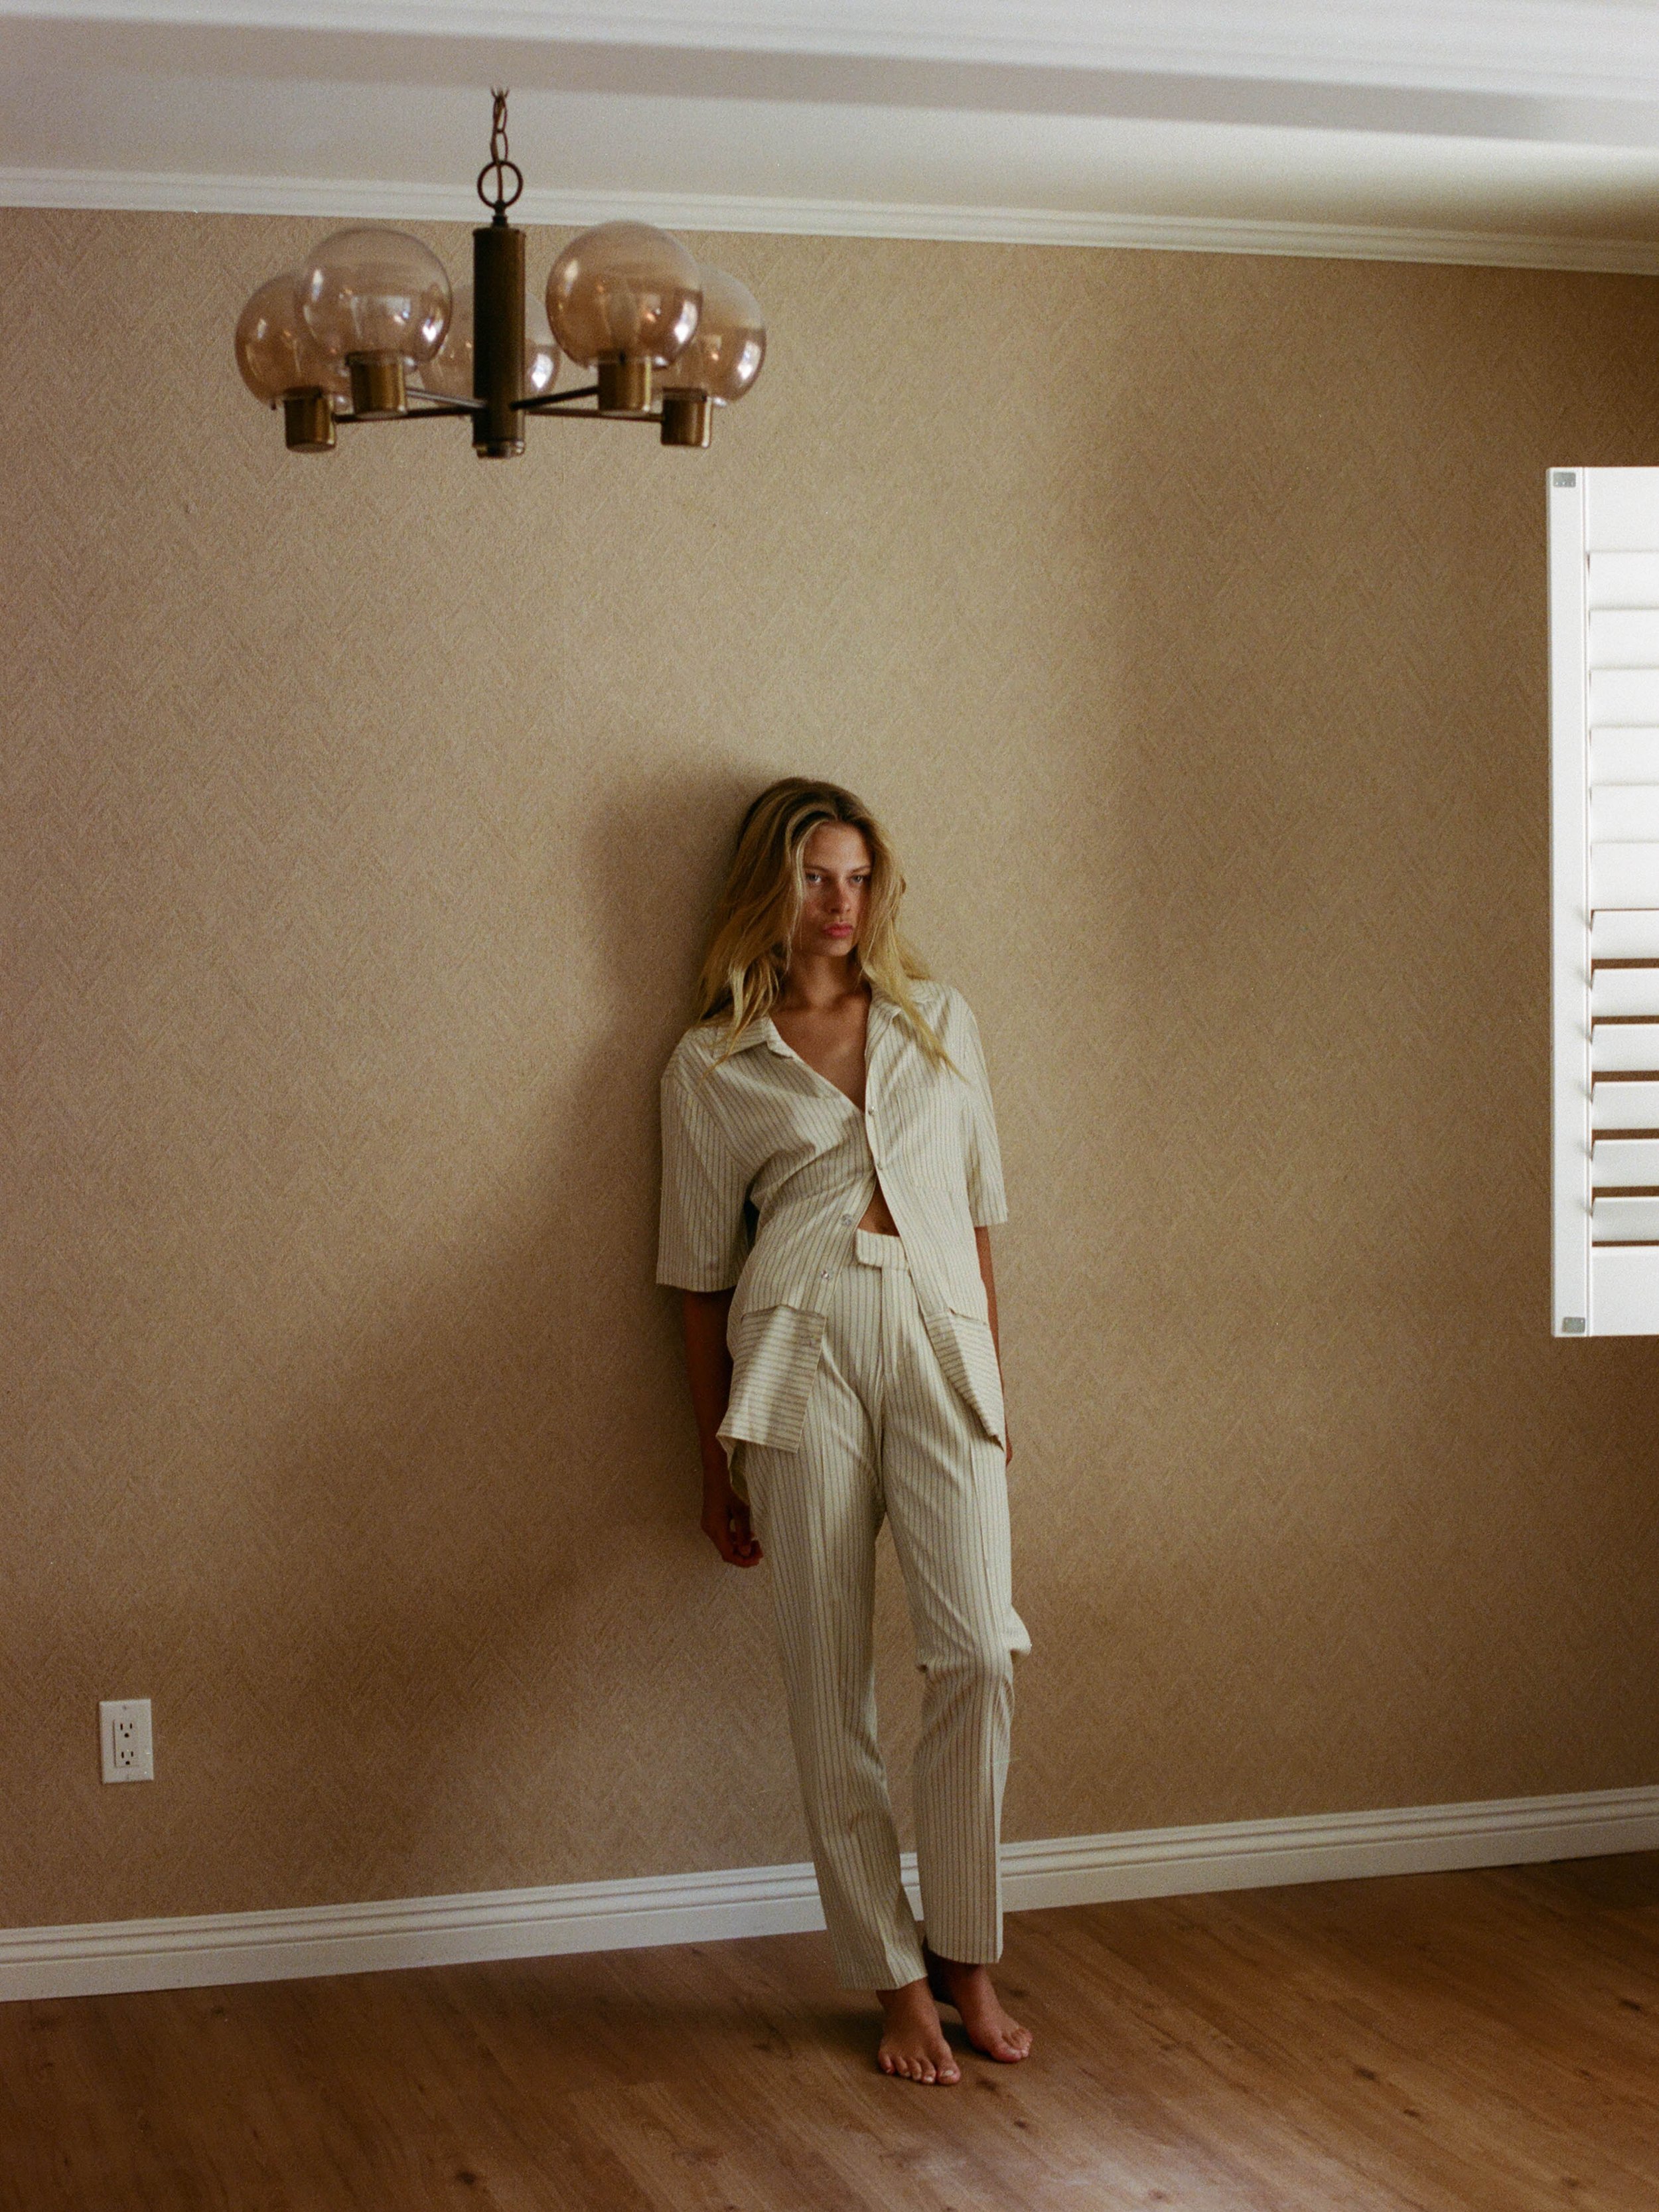  Model shot  with striped matching set against brown wallpaper. Styled by Emily Burnette. 